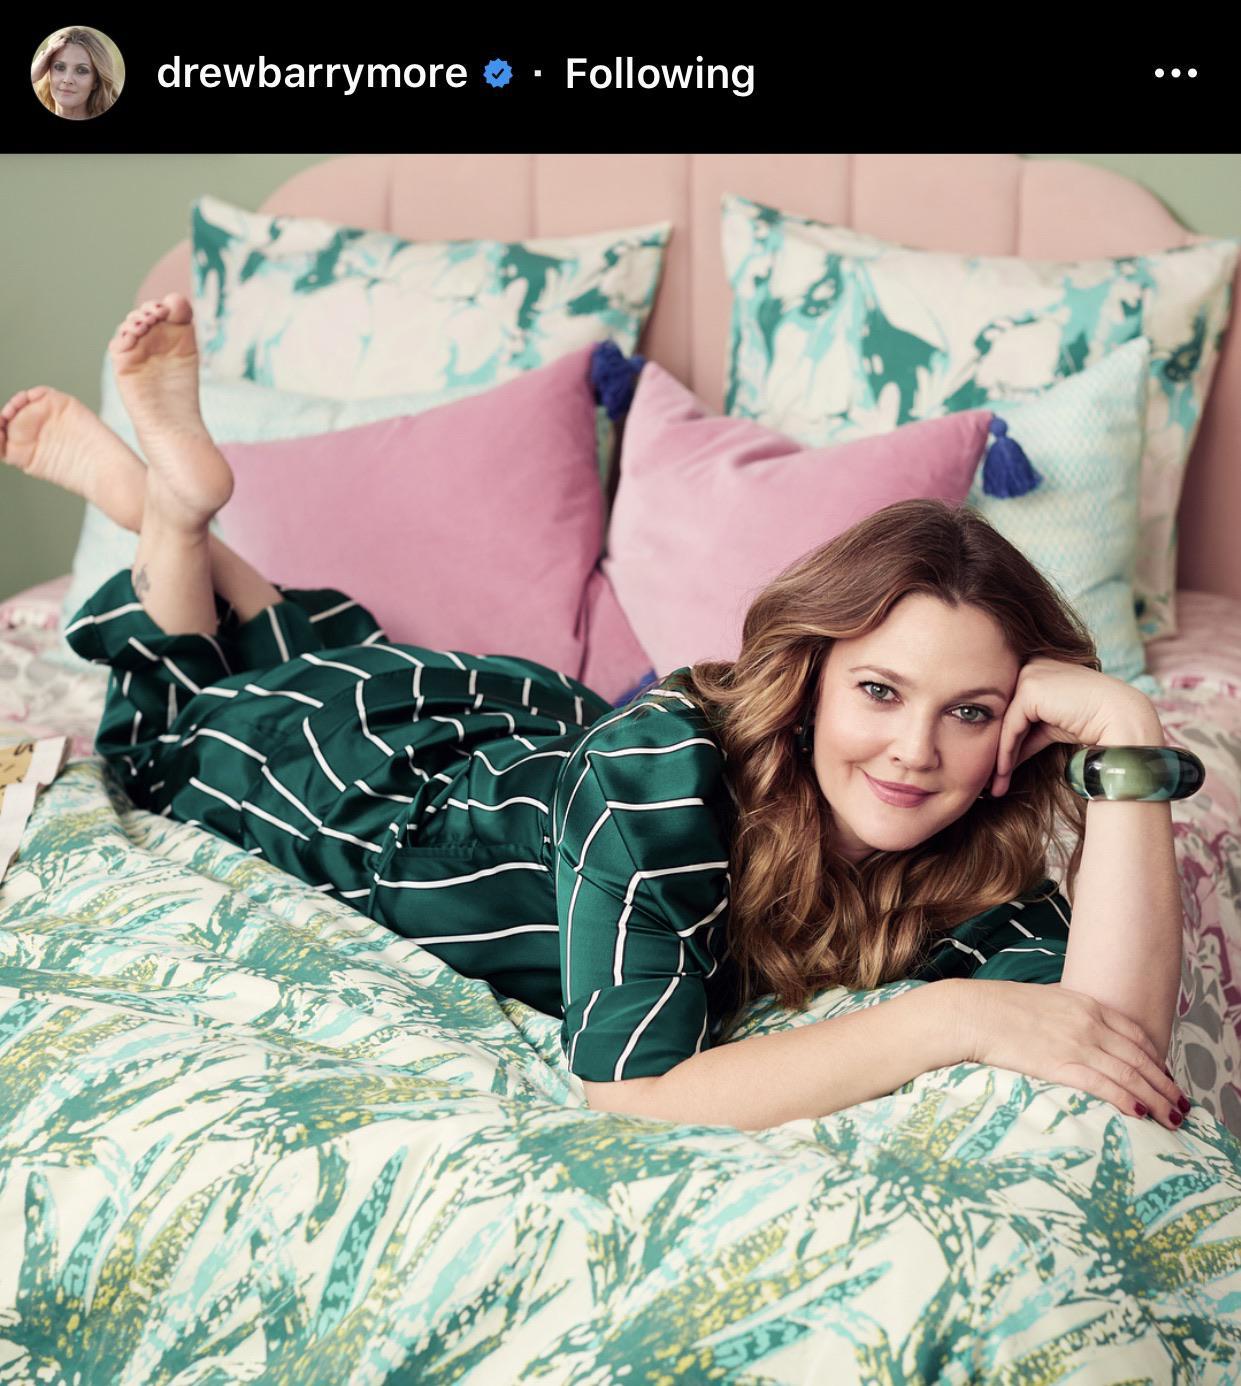 Drew Barrymore In The Pose With The Toe Scrunch Feet Toes Footfetis